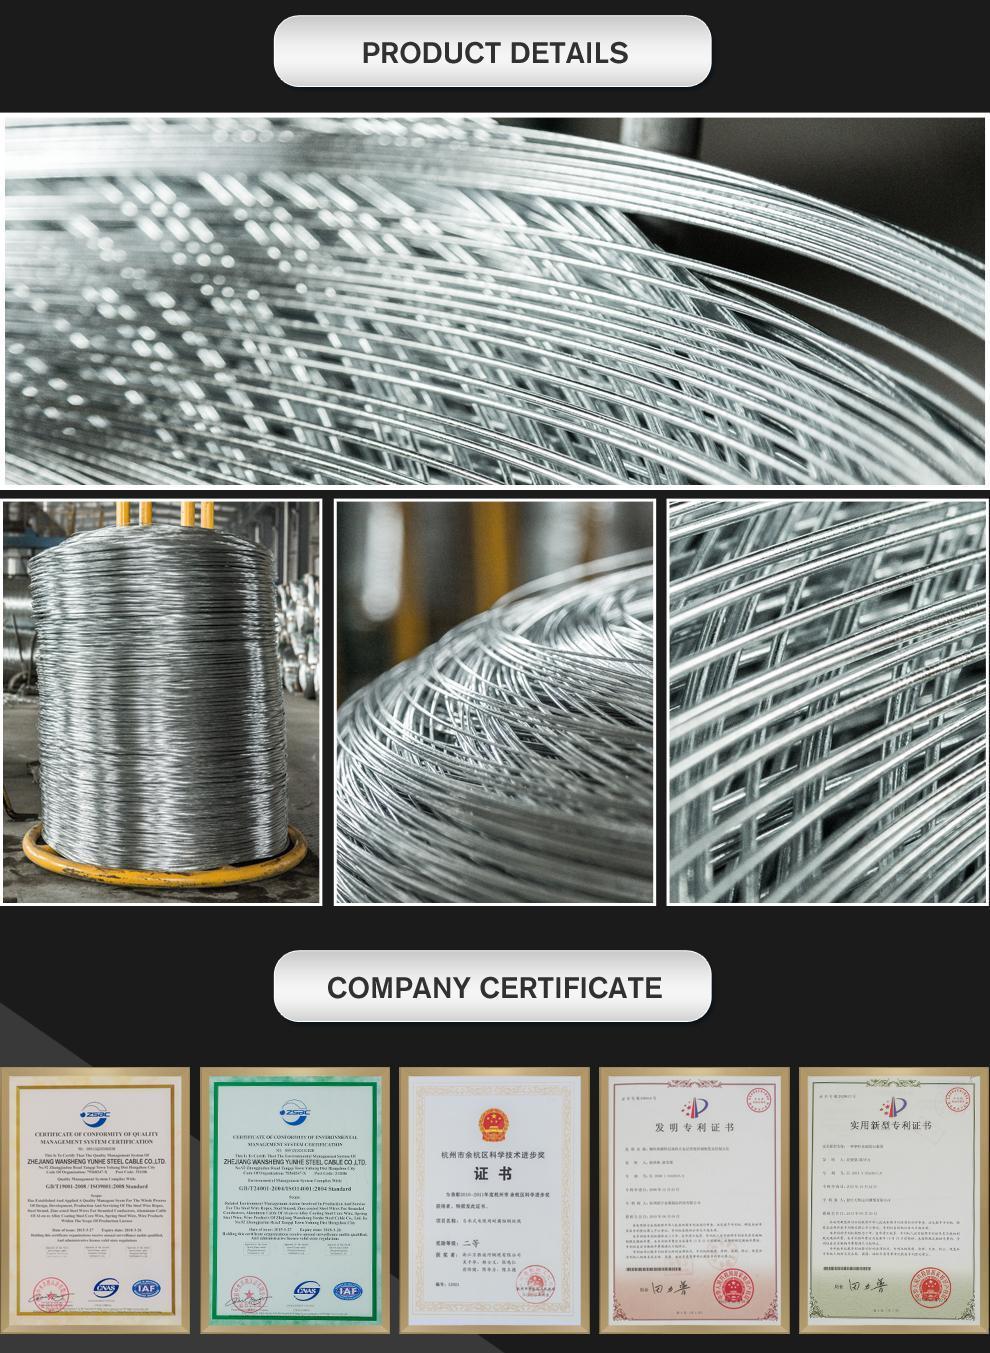 SAE 9254 Spring Steel Wires